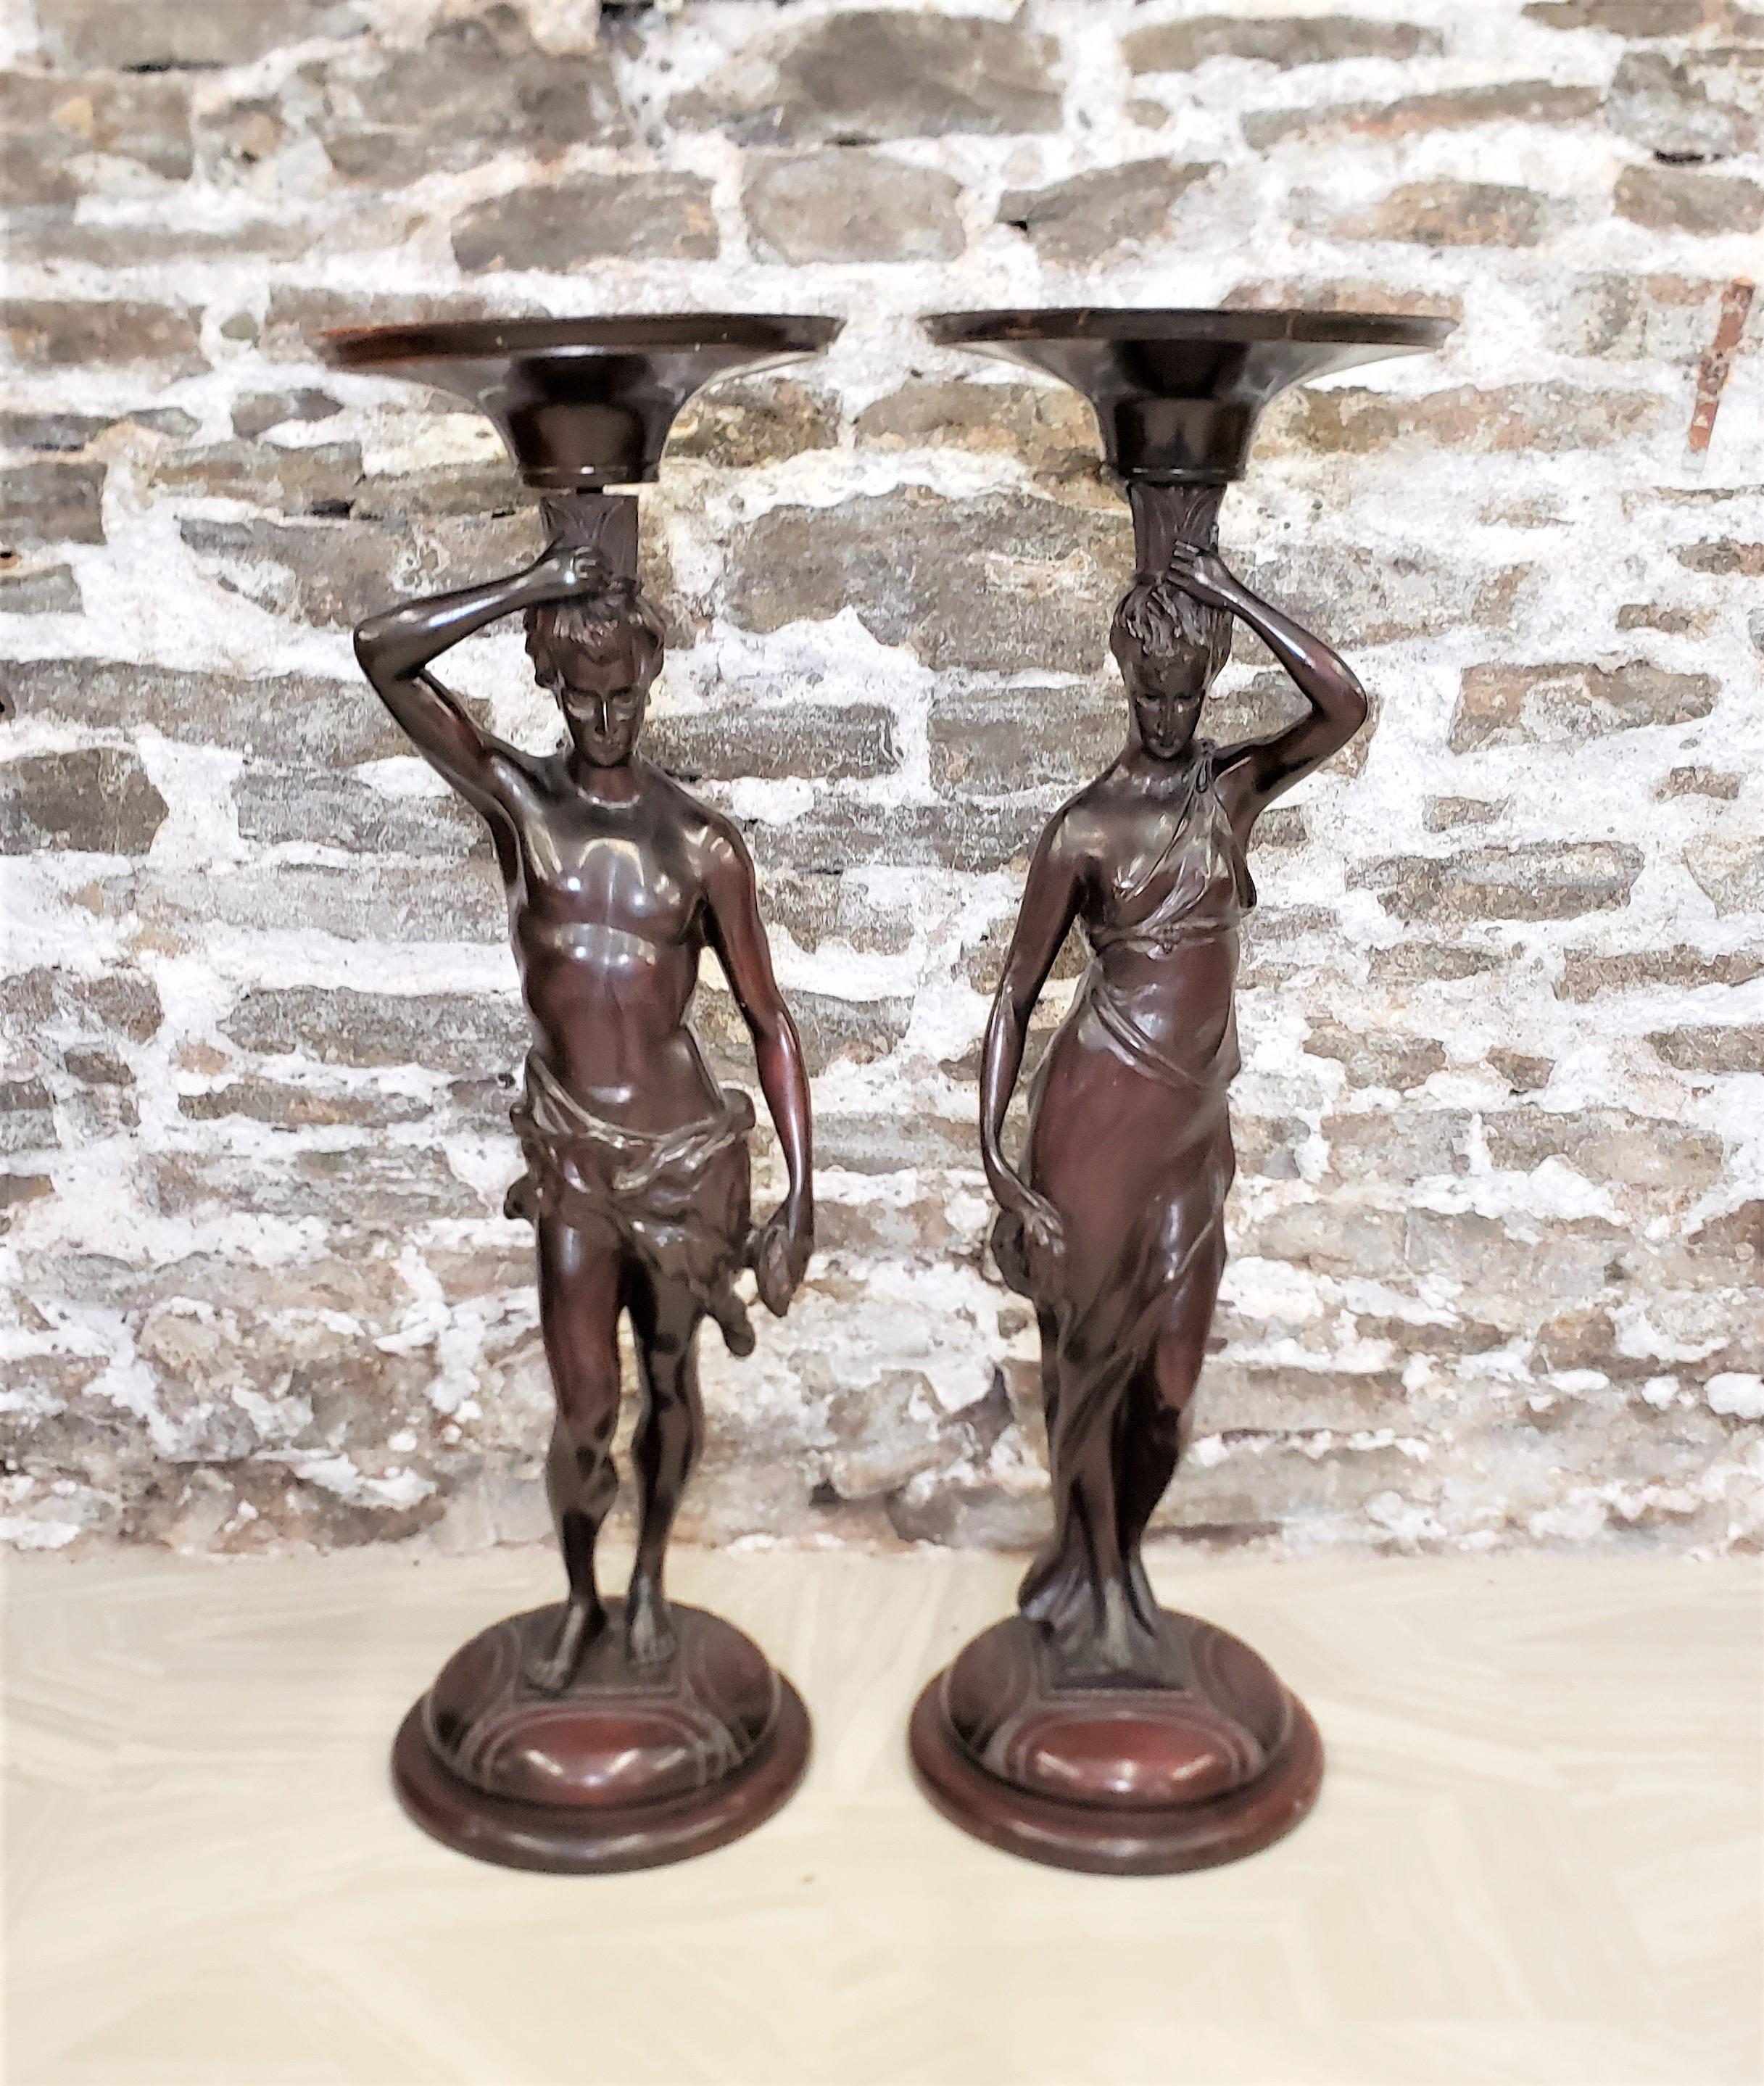 This pair of antique pedestals are unsigned, but presumed to have originated from the United States and date to approximately 1900 and done in a Neoclassical Revival style. The pedestals are composed of a hardwood that have been hand-carved to